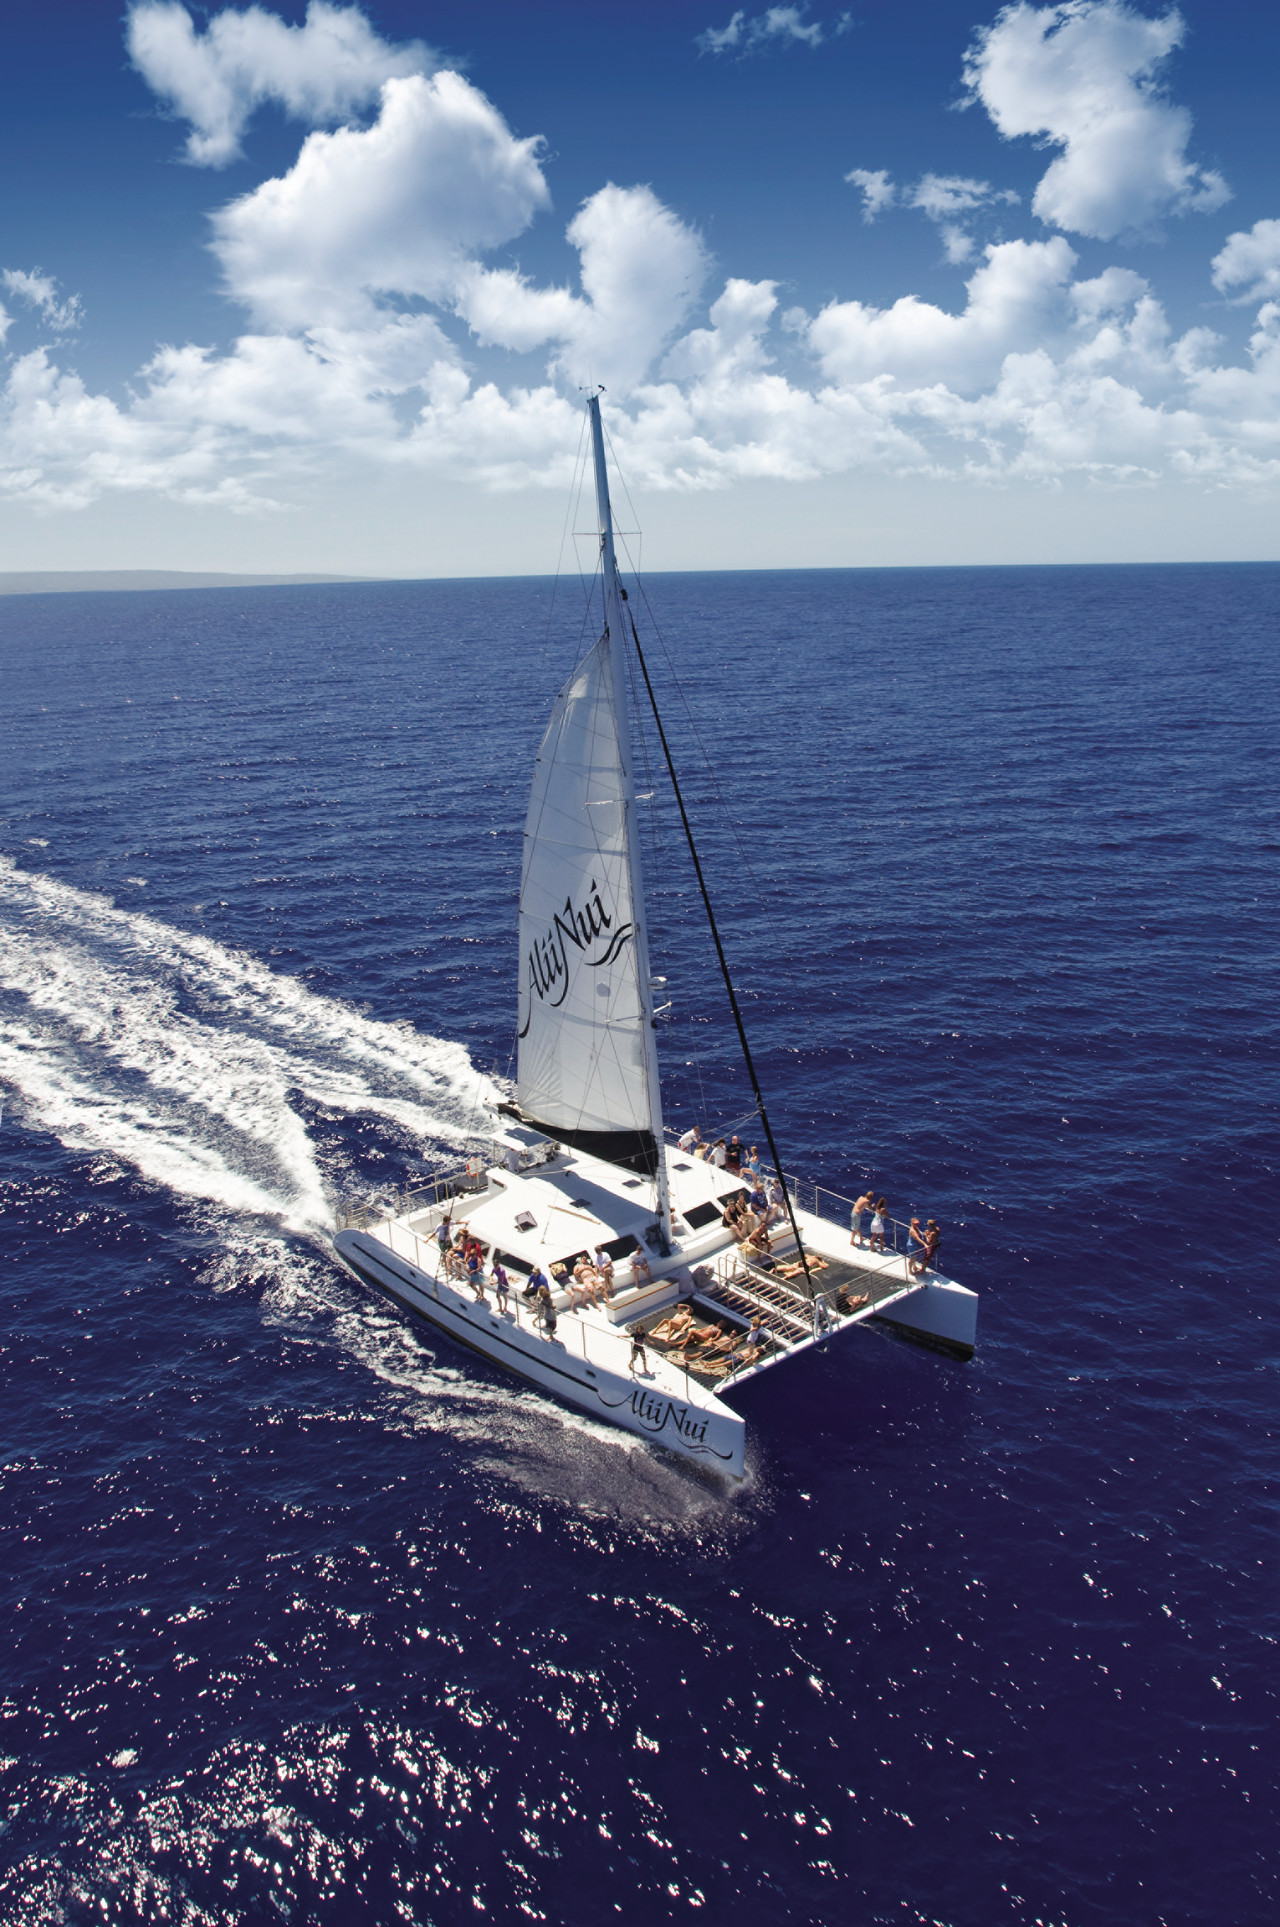 Four Season Resort Maui guests can reserve spots aboard a luxury catamaran, such as the Alii Nui for a two-hour whale watching trip in Maui.